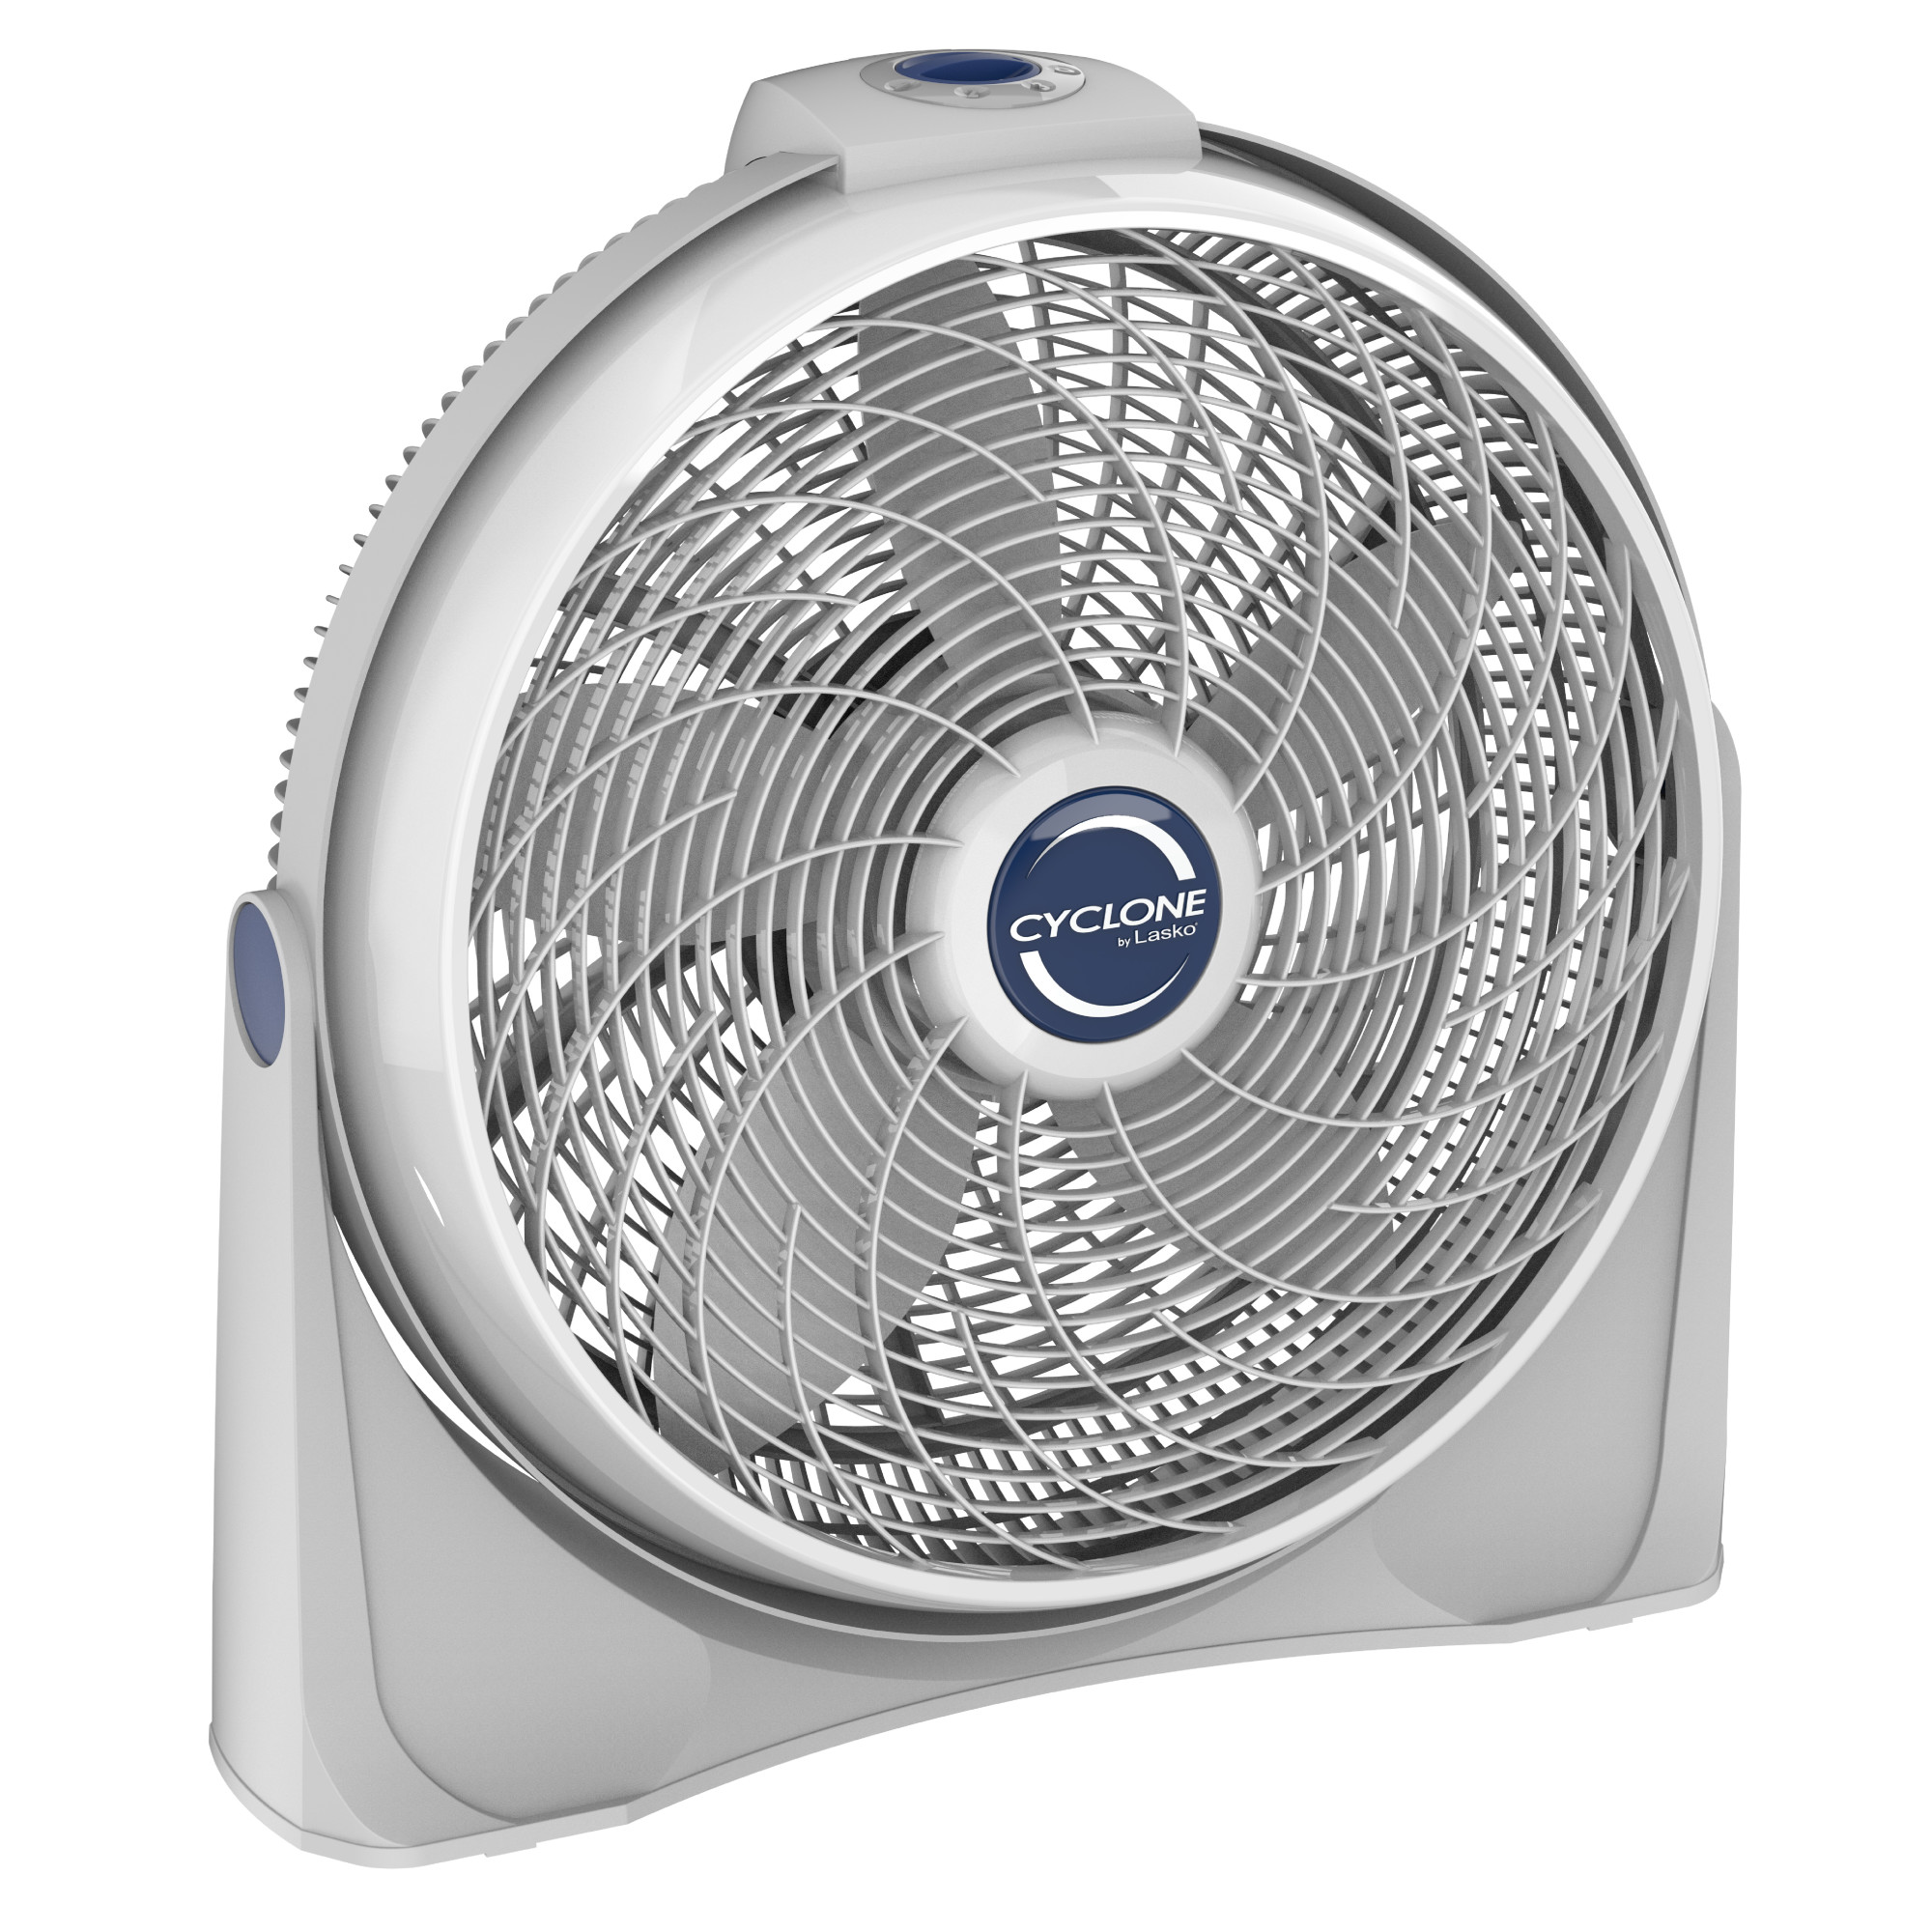 Lasko 20" Cyclone Air Circulator Floor Fan with Wall Mount Option, 23" Height, White, 3520, New - image 1 of 14